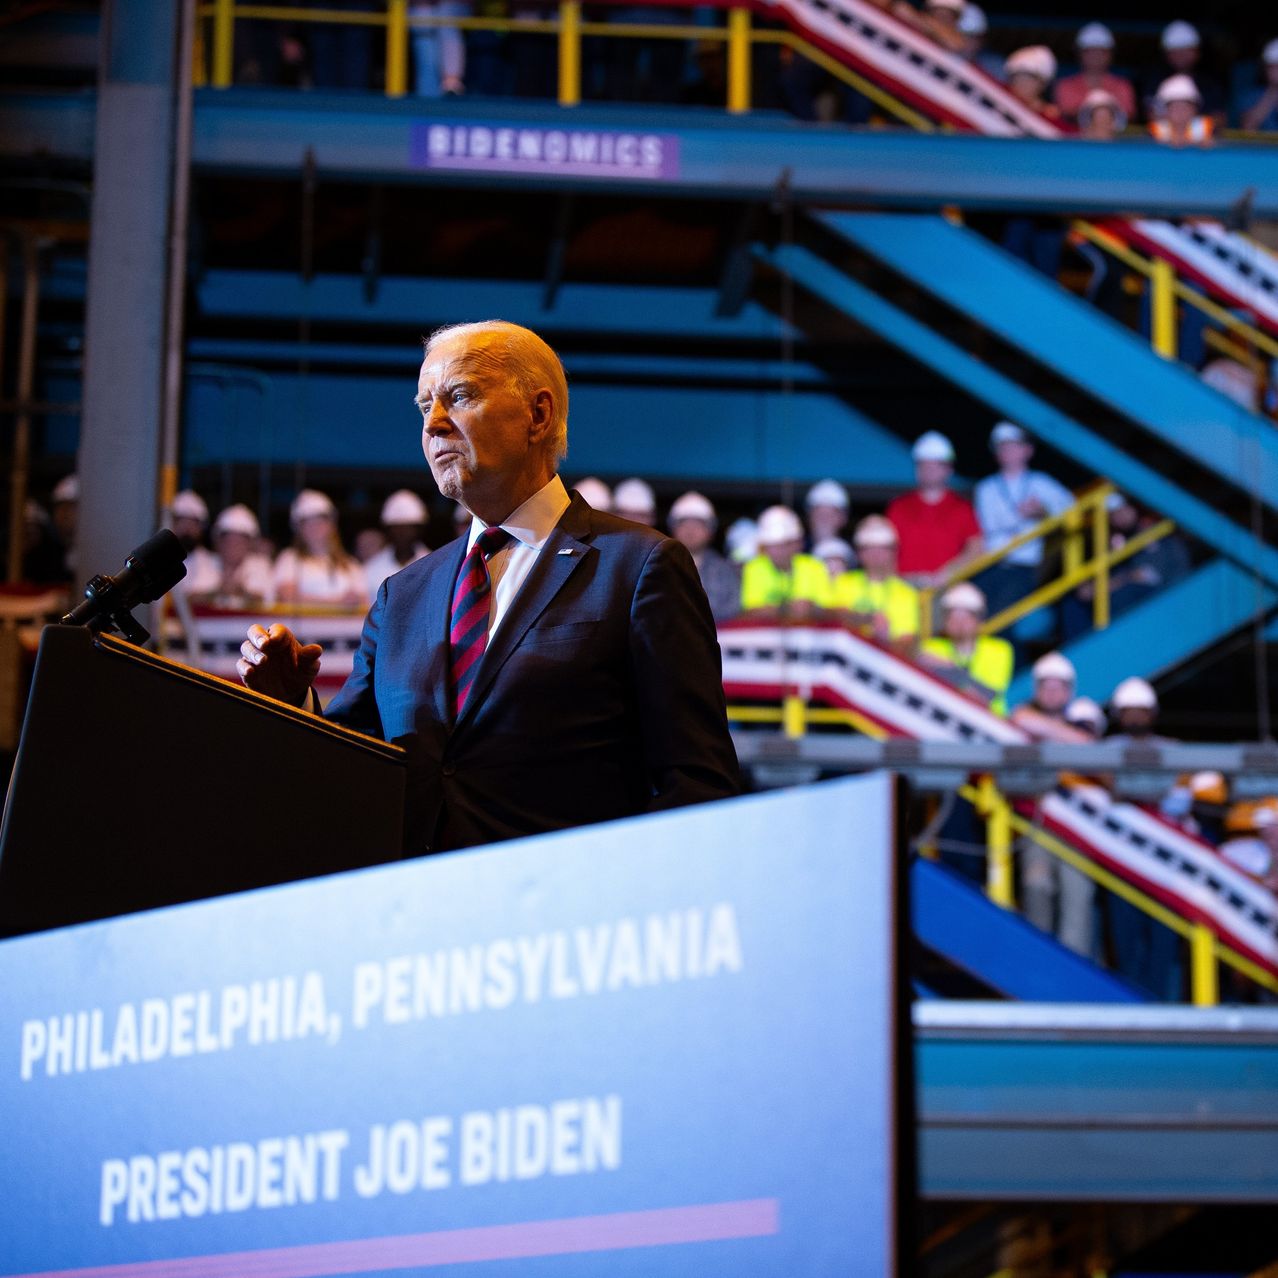 President Biden delivers a speech at Philly Shipyard in Philadelphia on Thursday, part of a campaign to get voters more optimistic about the economy.